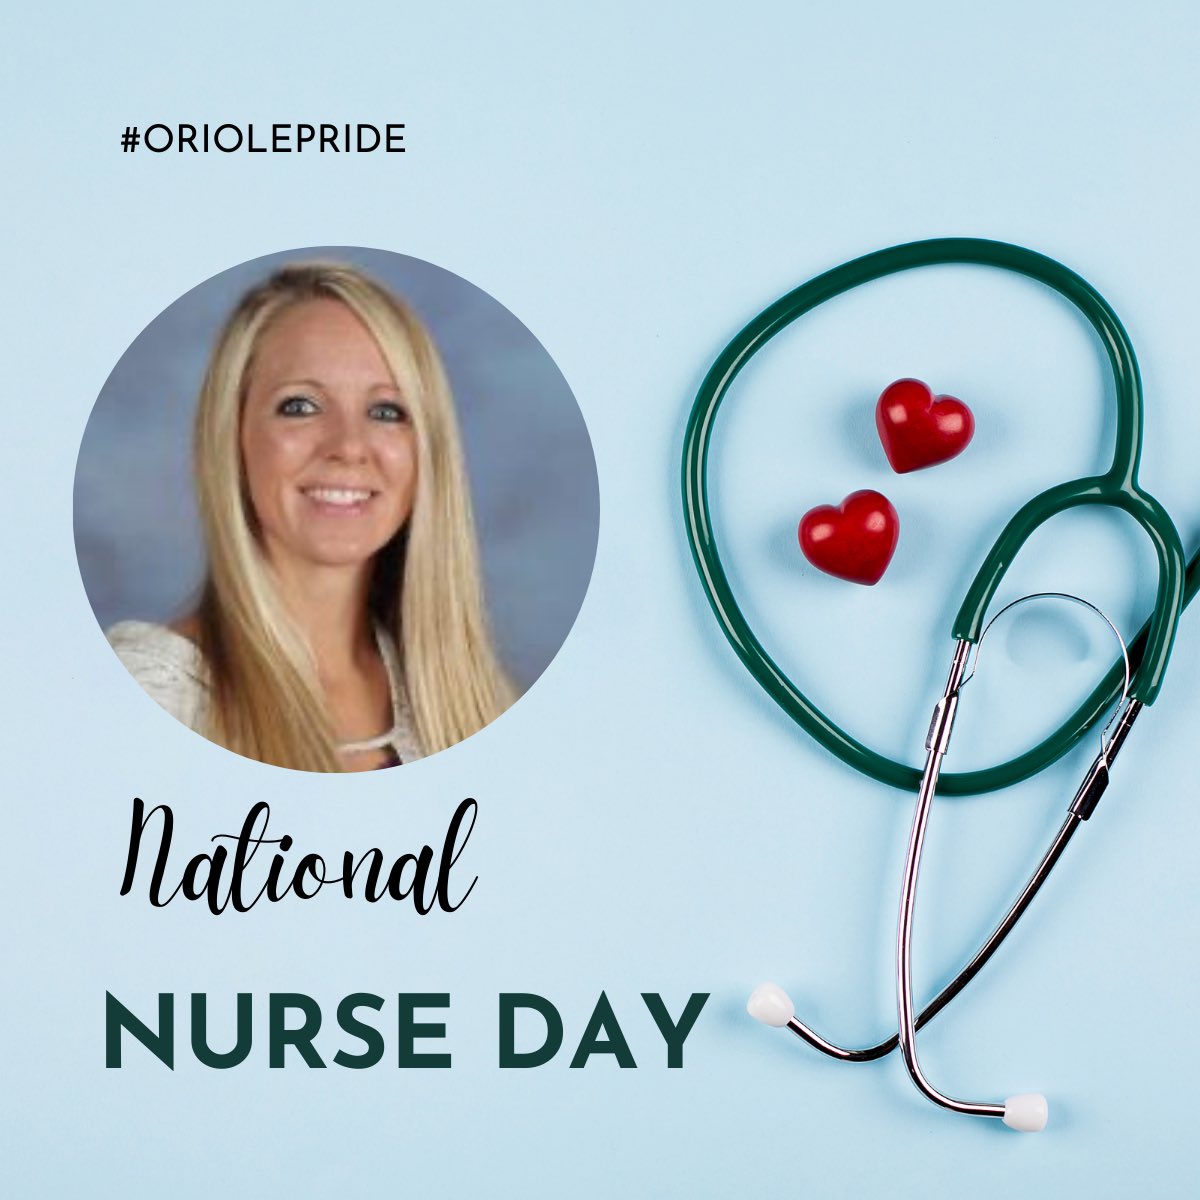 Happy National Nurses Day to the amazing Jennifer Dawson! When it comes to nurses, we truly have the best. #NationalNursesDay #ThankANurse #OriolePride